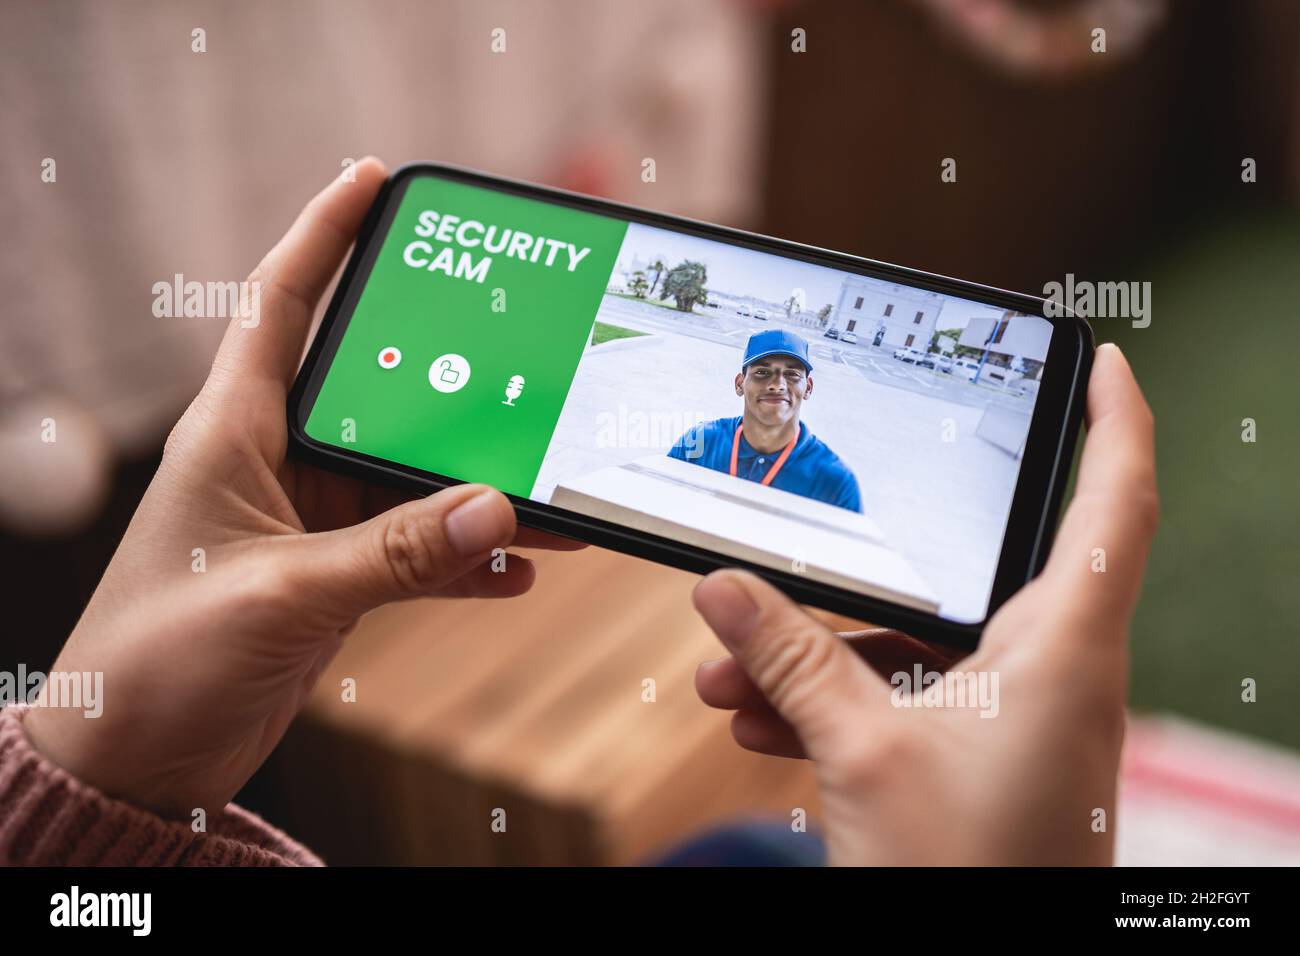 Woman watching delivery man through security camera system on mobile phone at home - Cctv smart technology lifestyle concept Stock Photo